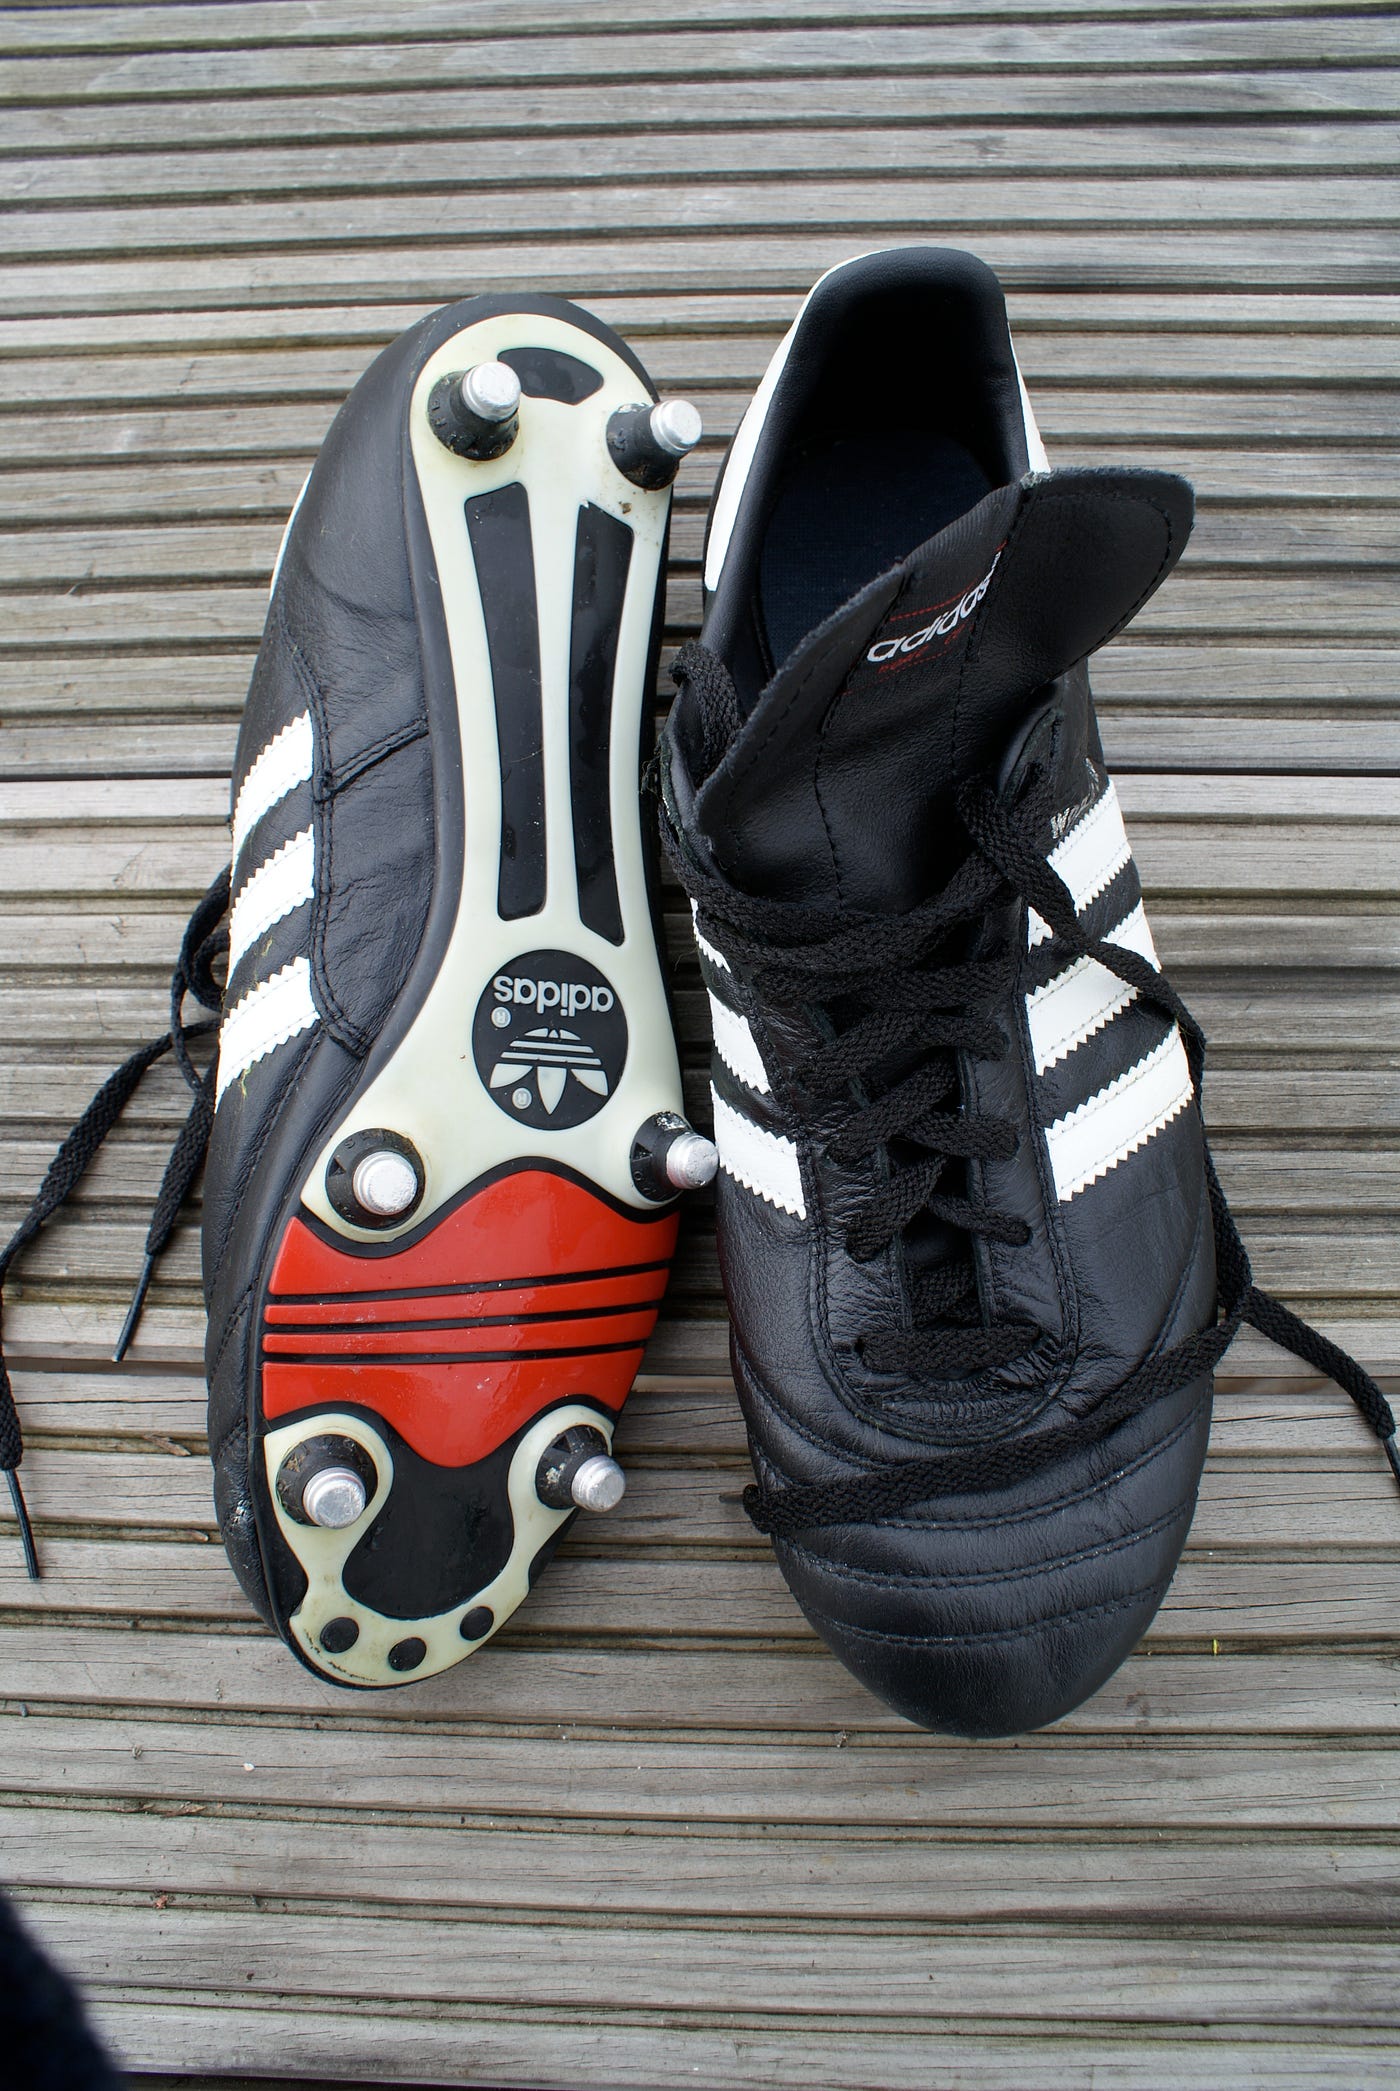 How I fell in love with the Adidas World Cup football boot | by Anthony  Teasdale | Medium